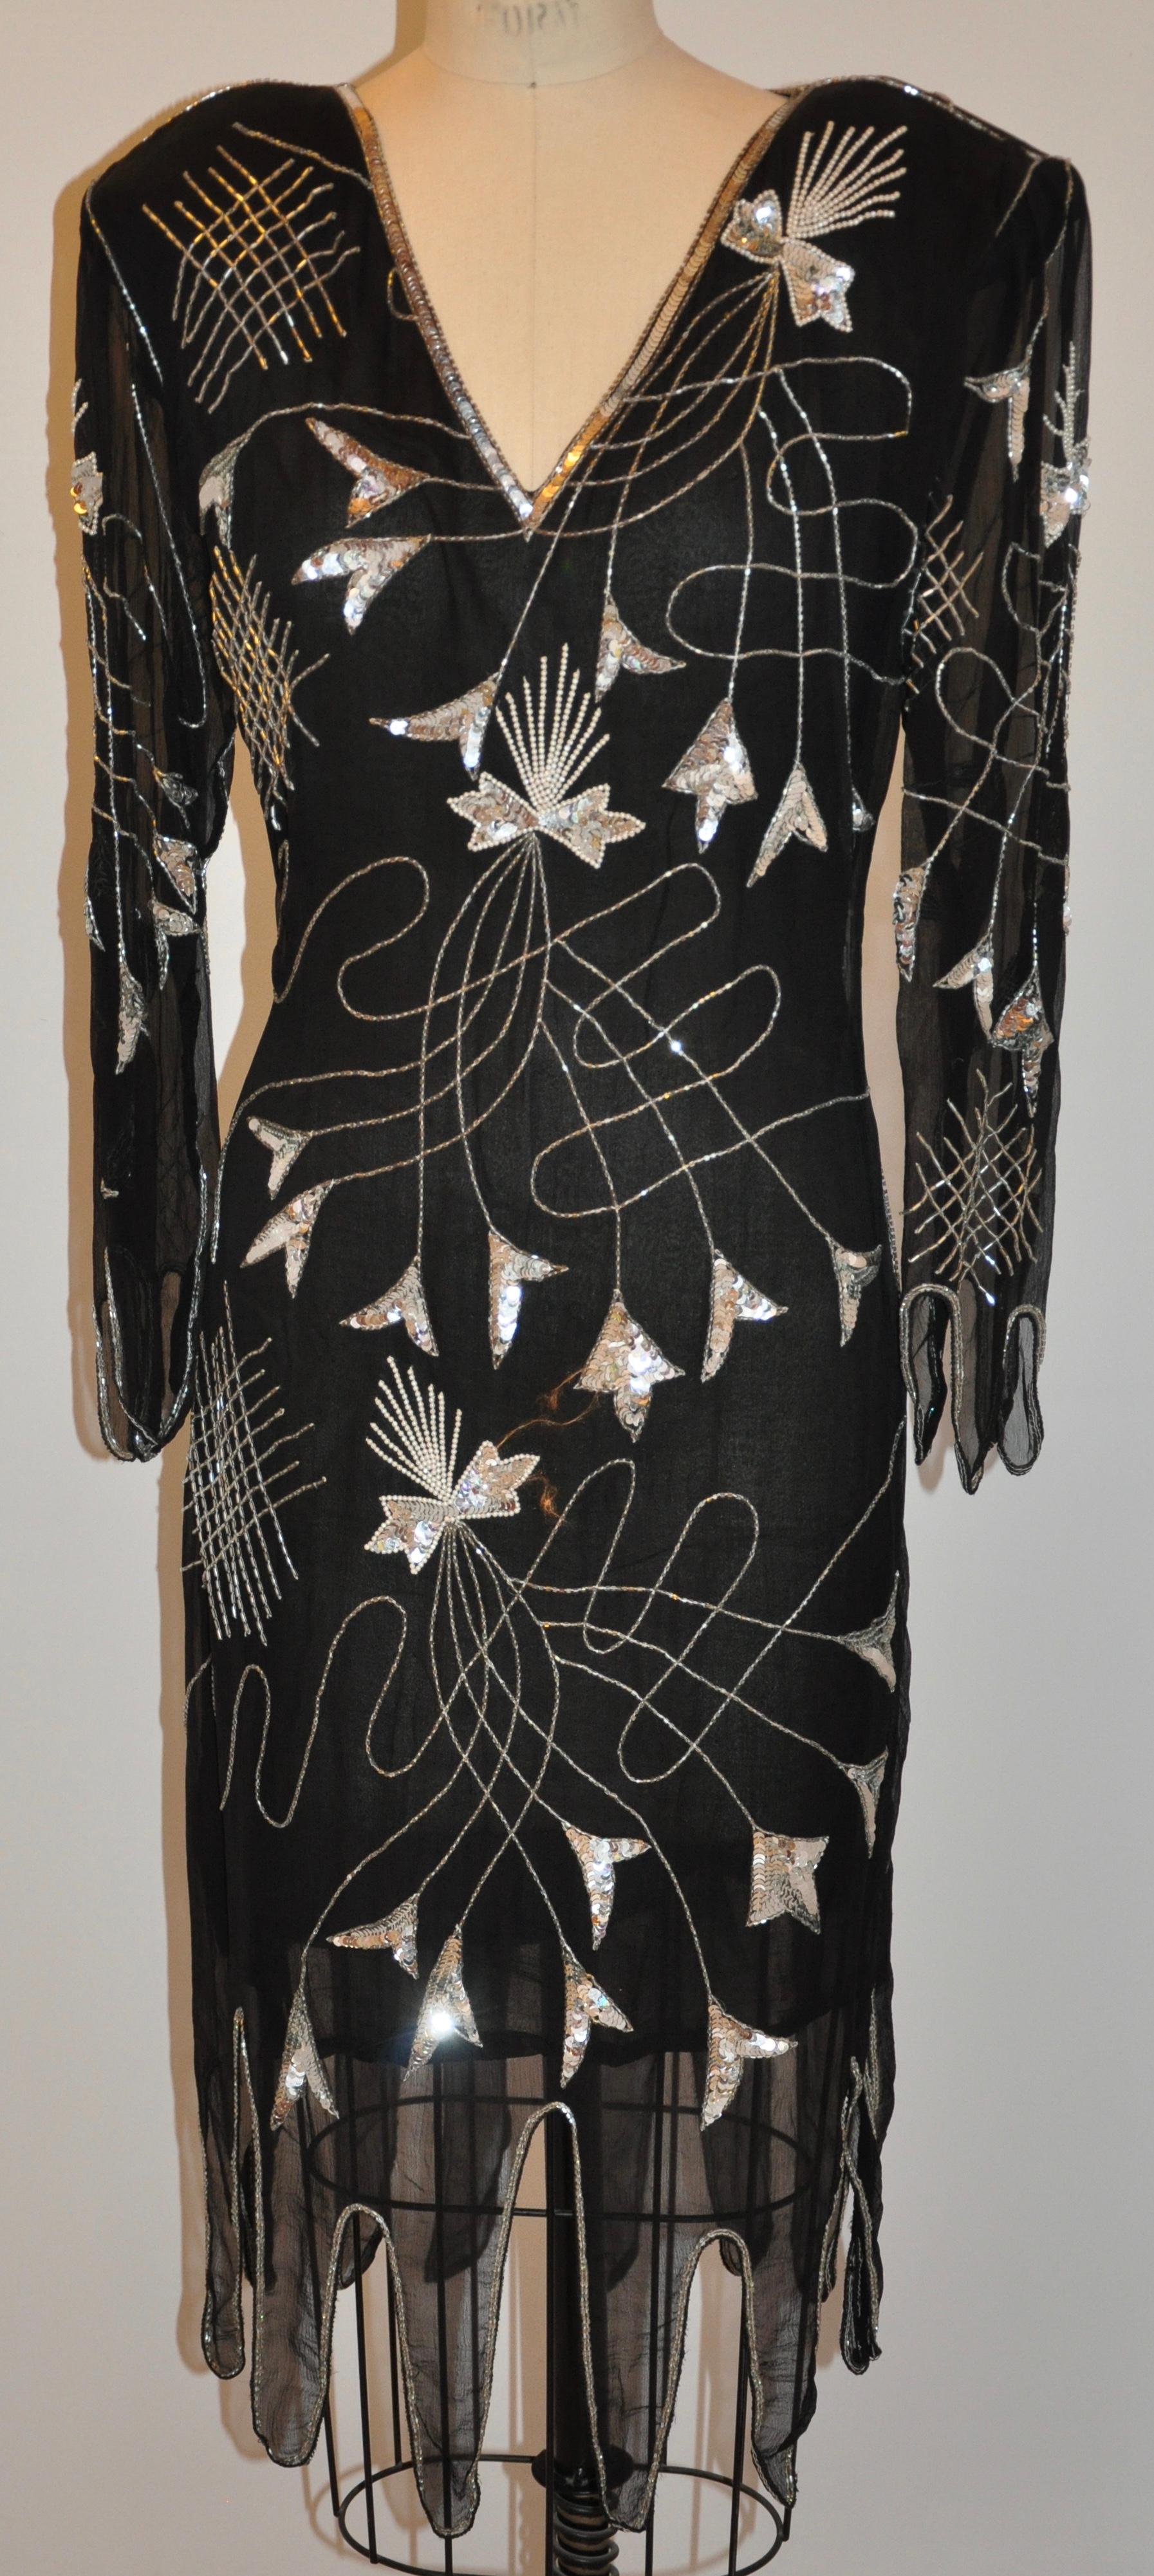        Sweet Lo Iconic 1970s double layered black chiffon with scallop hemline and sleeves beaded evening dress measures 46 inches in length. Shoulders measures 18 inches across, neck-to-sleeve is 4 1/2 inches, sleeves are 24 inches accented with